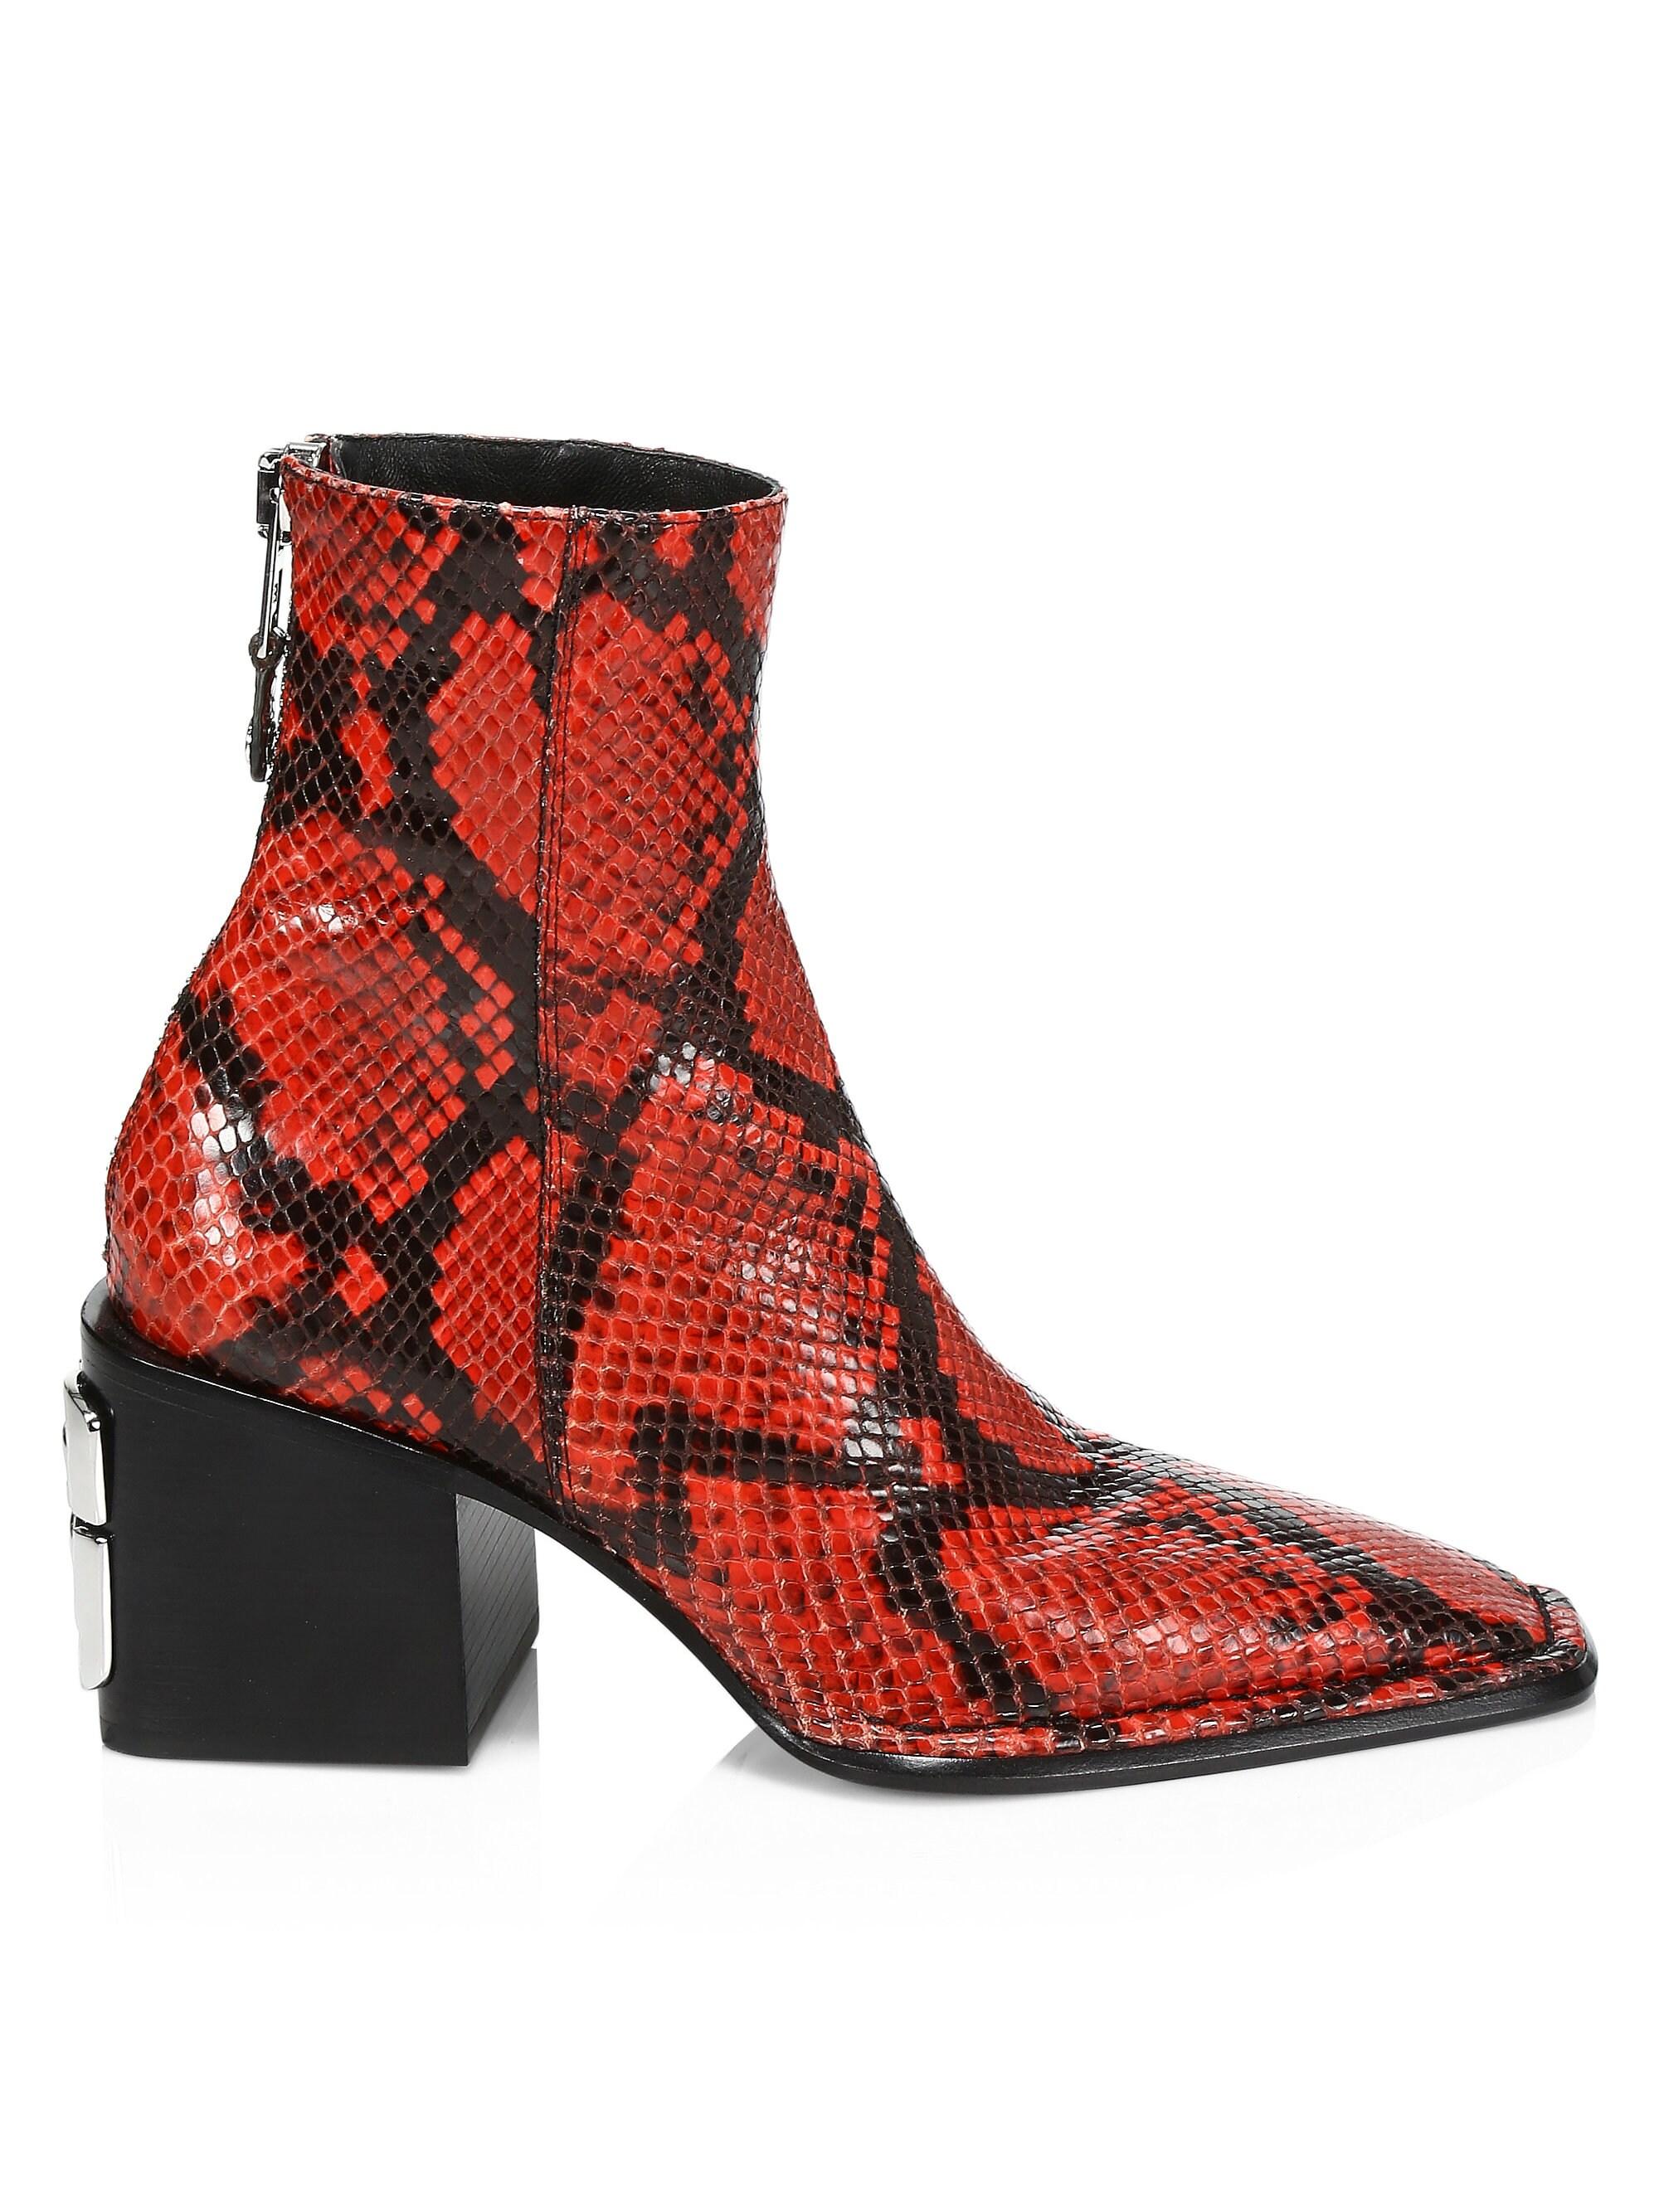 Alexander Wang Parker Square-toe Python-embossed Leather Ankle Boots in ...